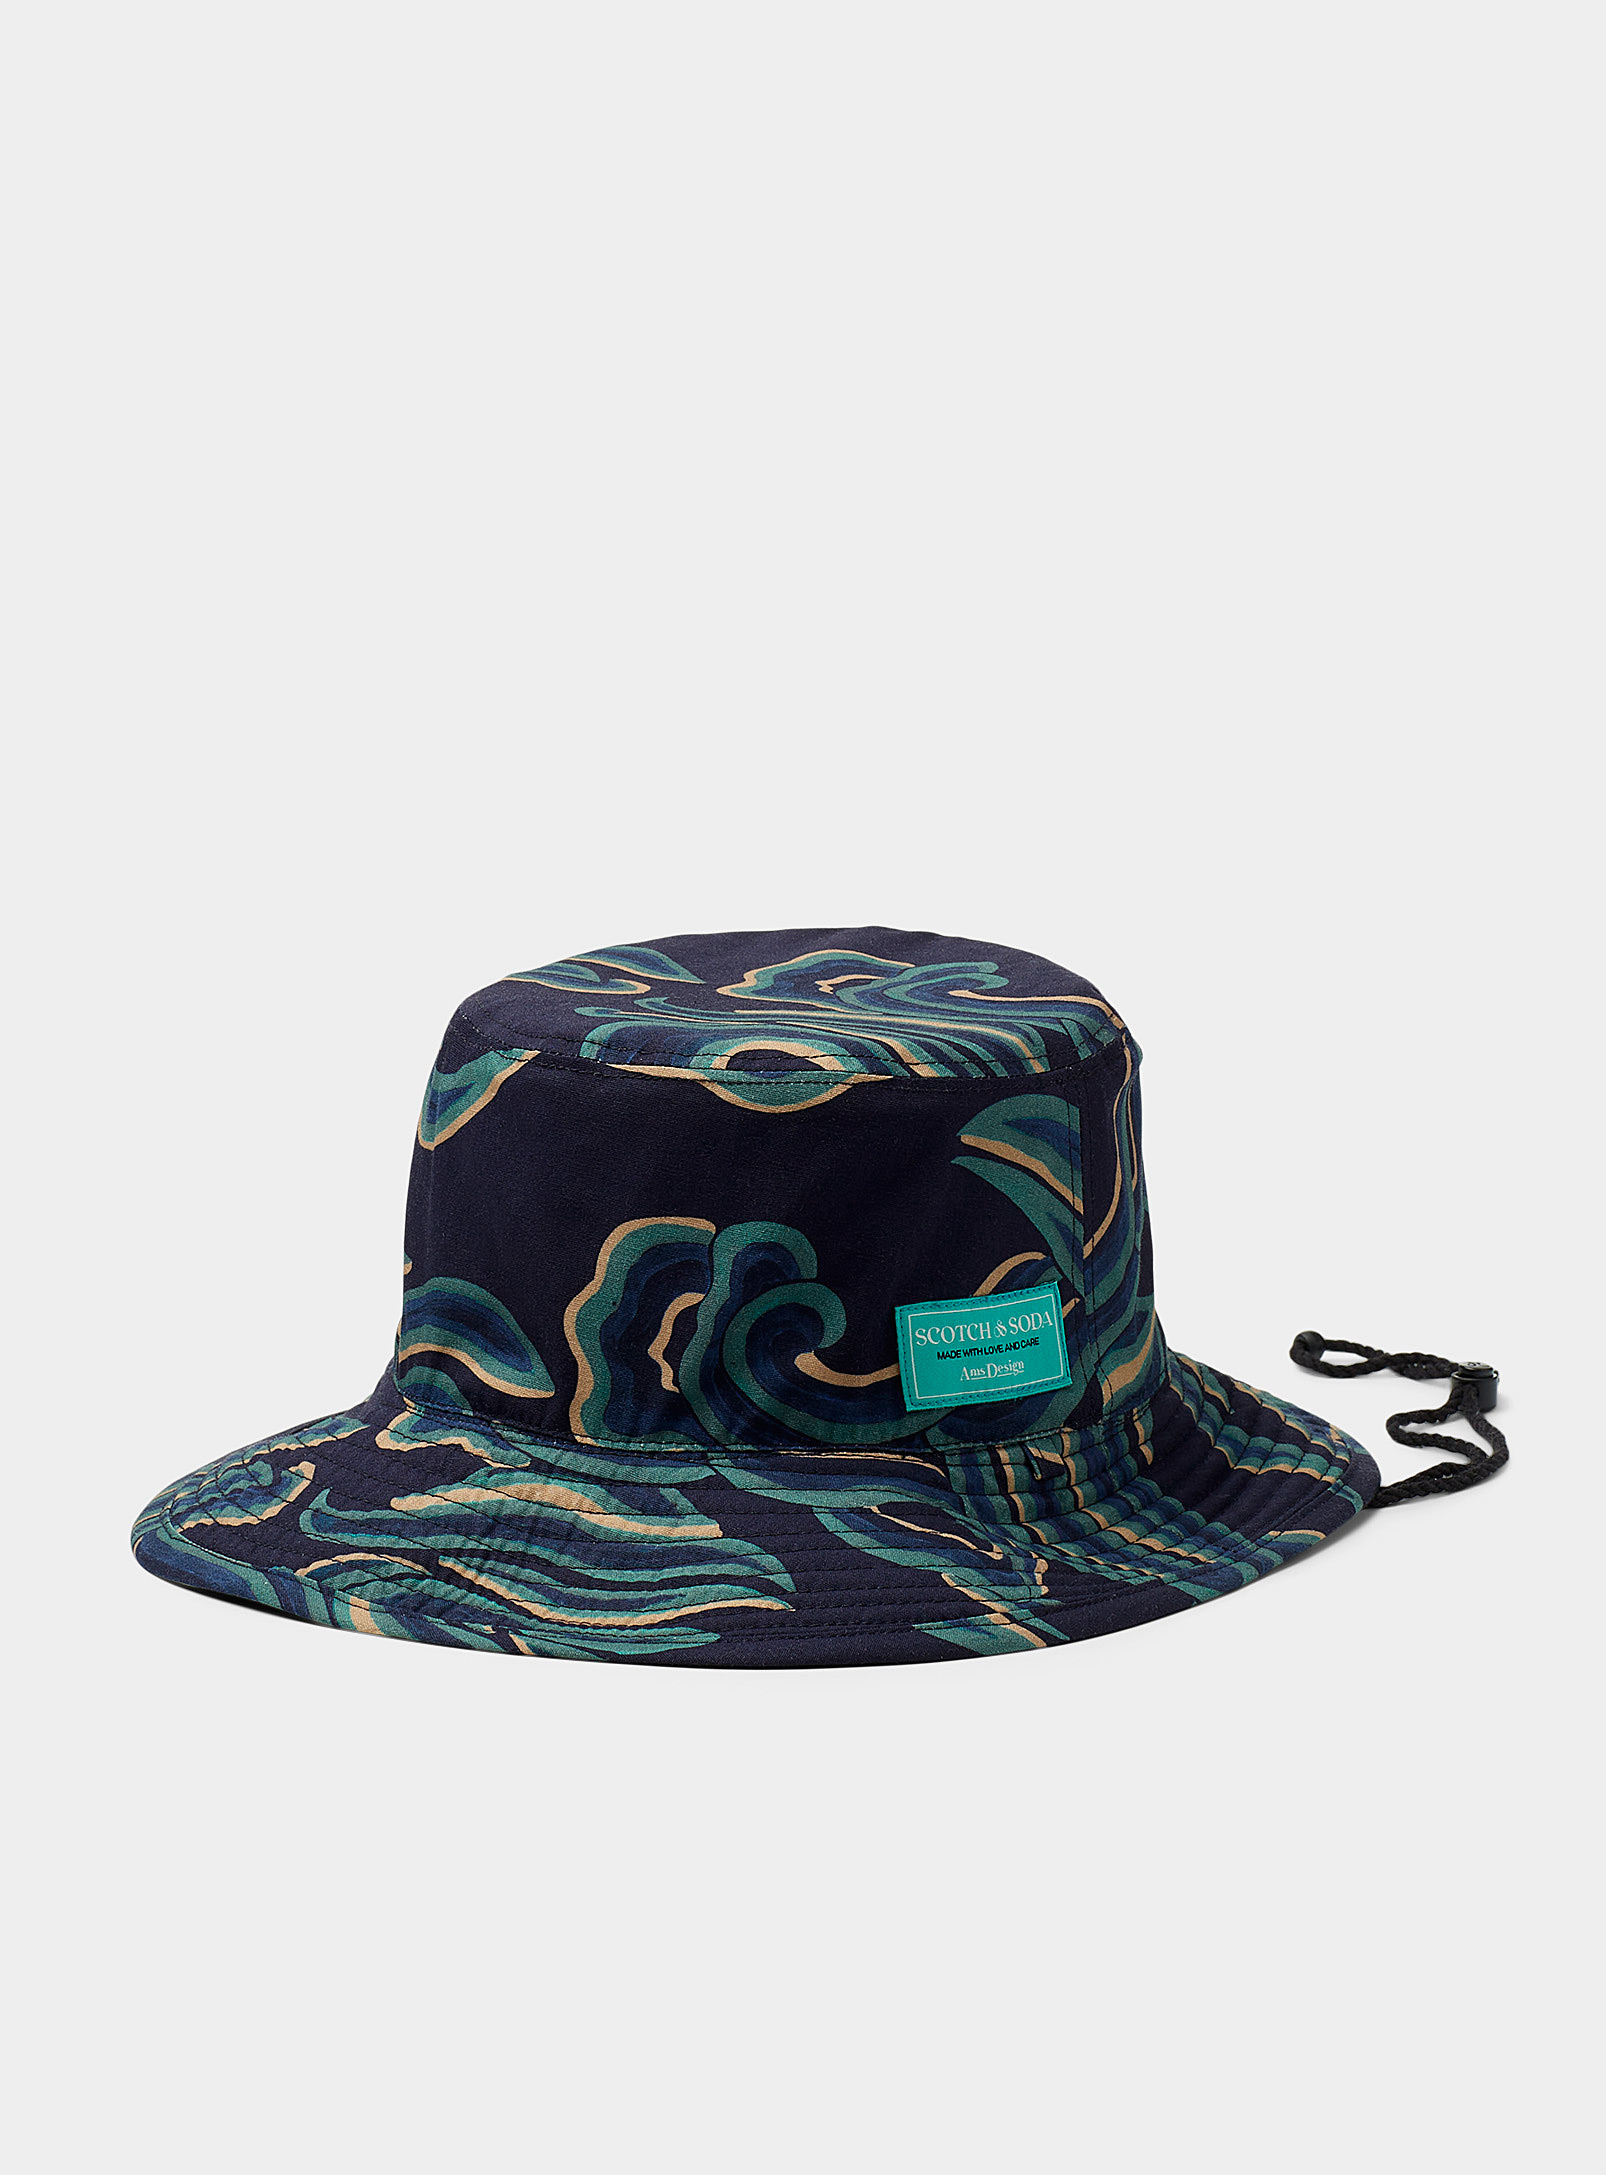 Scotch & Soda Reversible Abstract Foliage Bucket Hat In Black